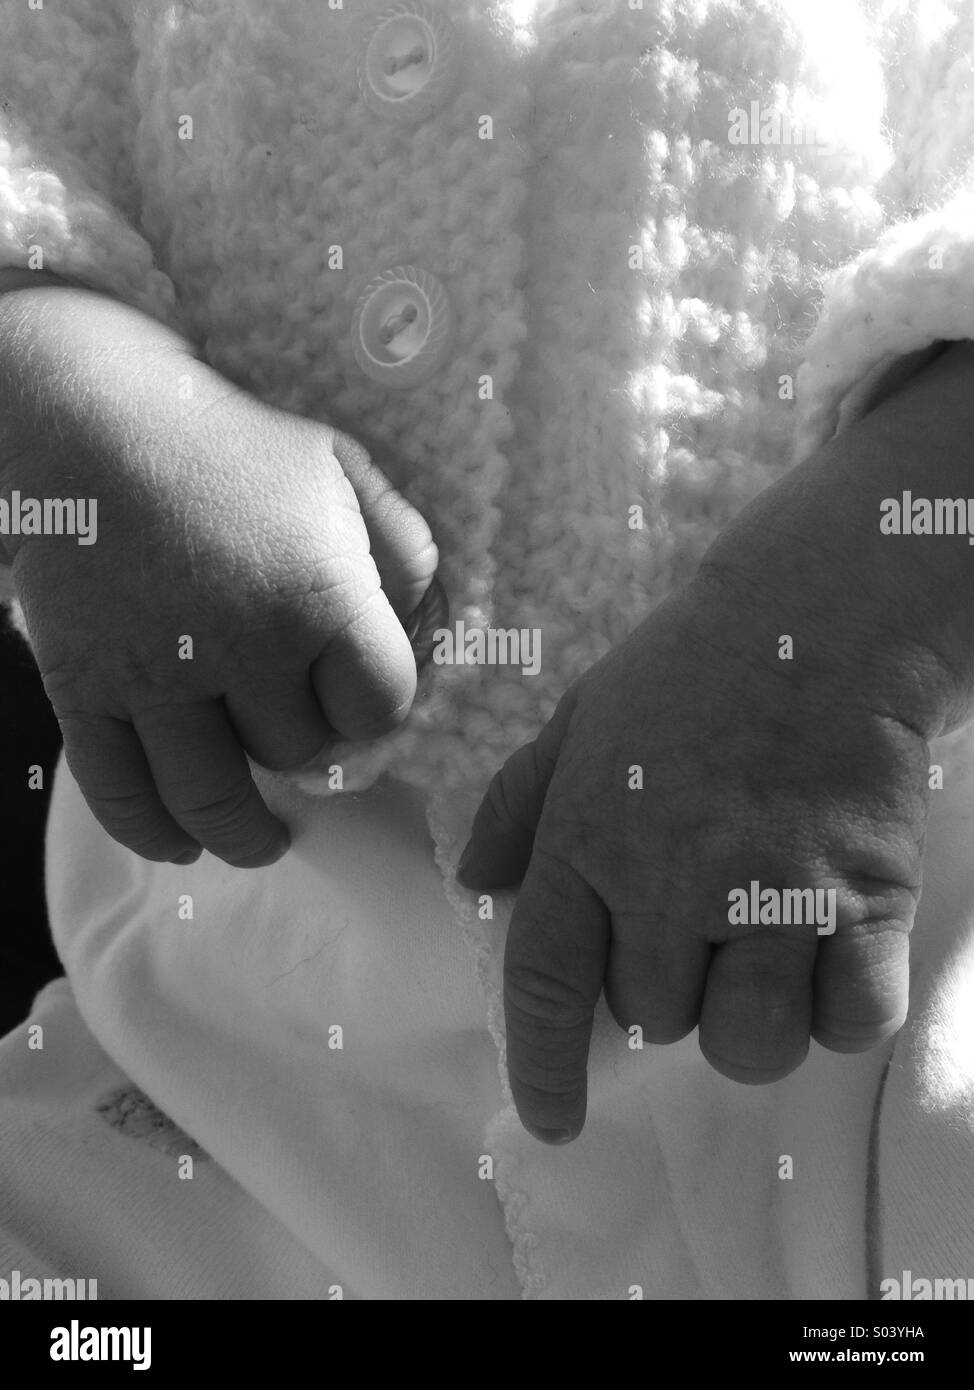 Hands of a new born baby Stock Photo